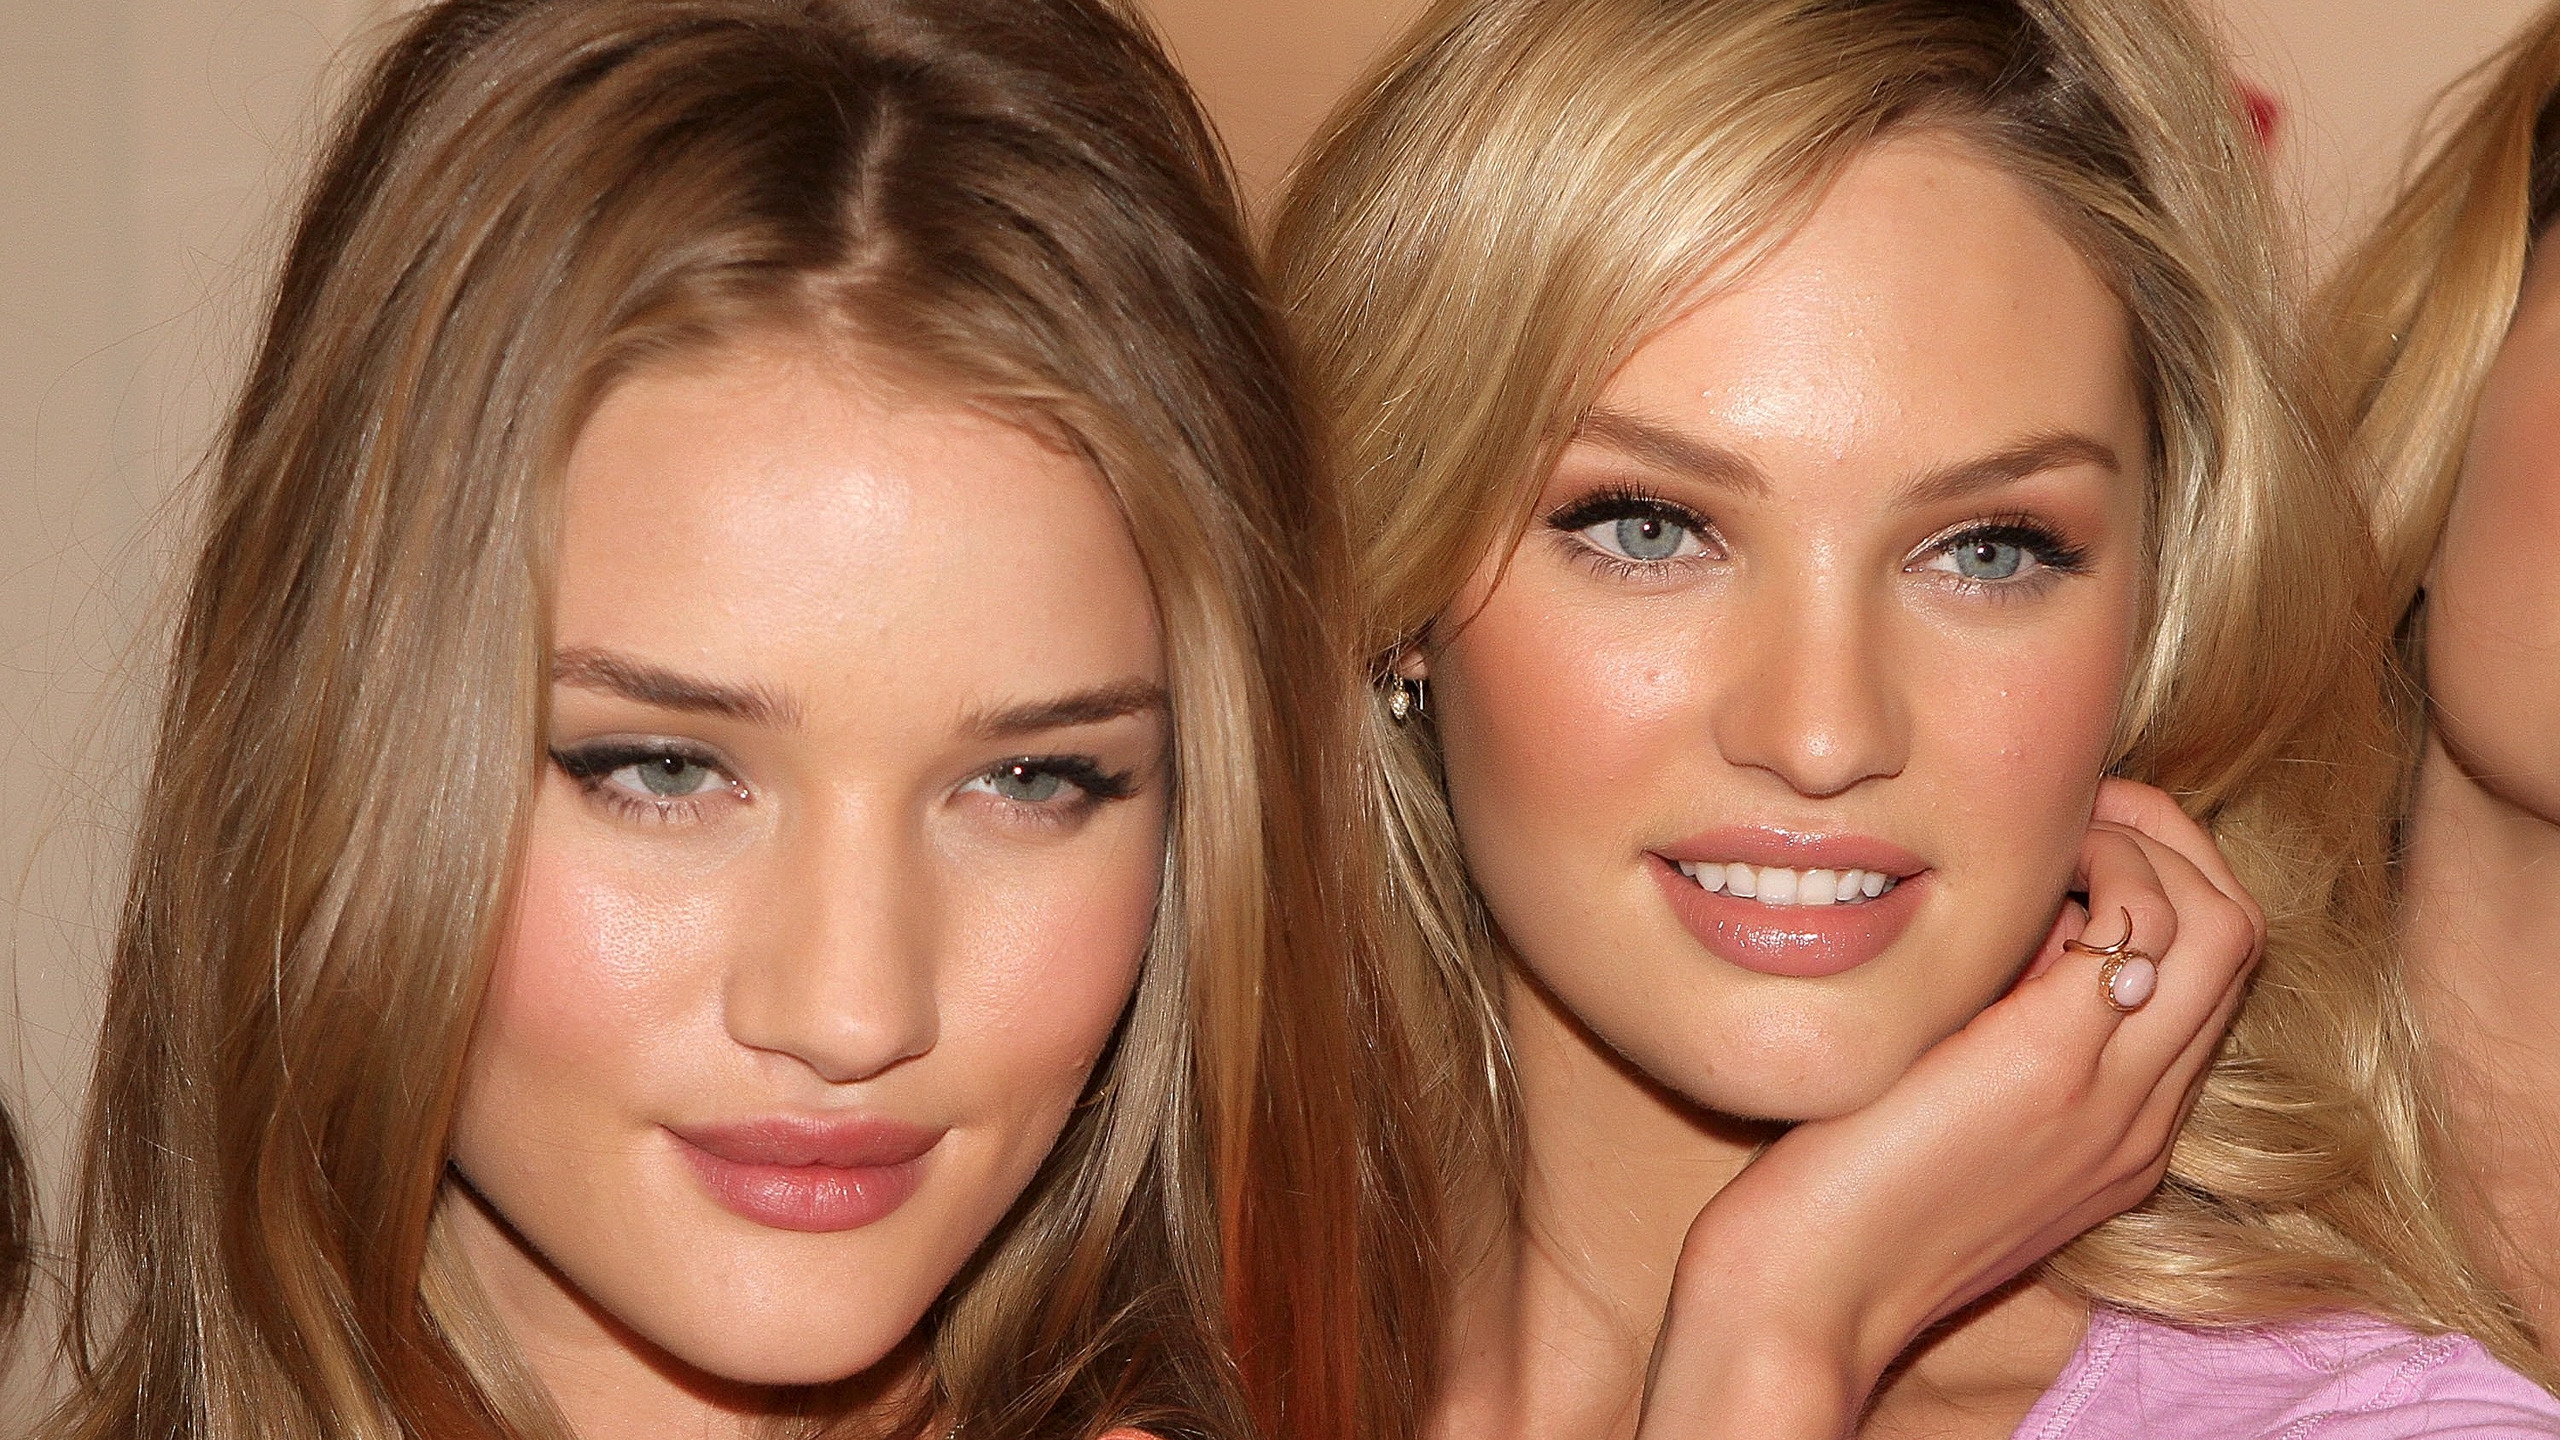 Rosie and Candice for 2560x1440 HDTV resolution